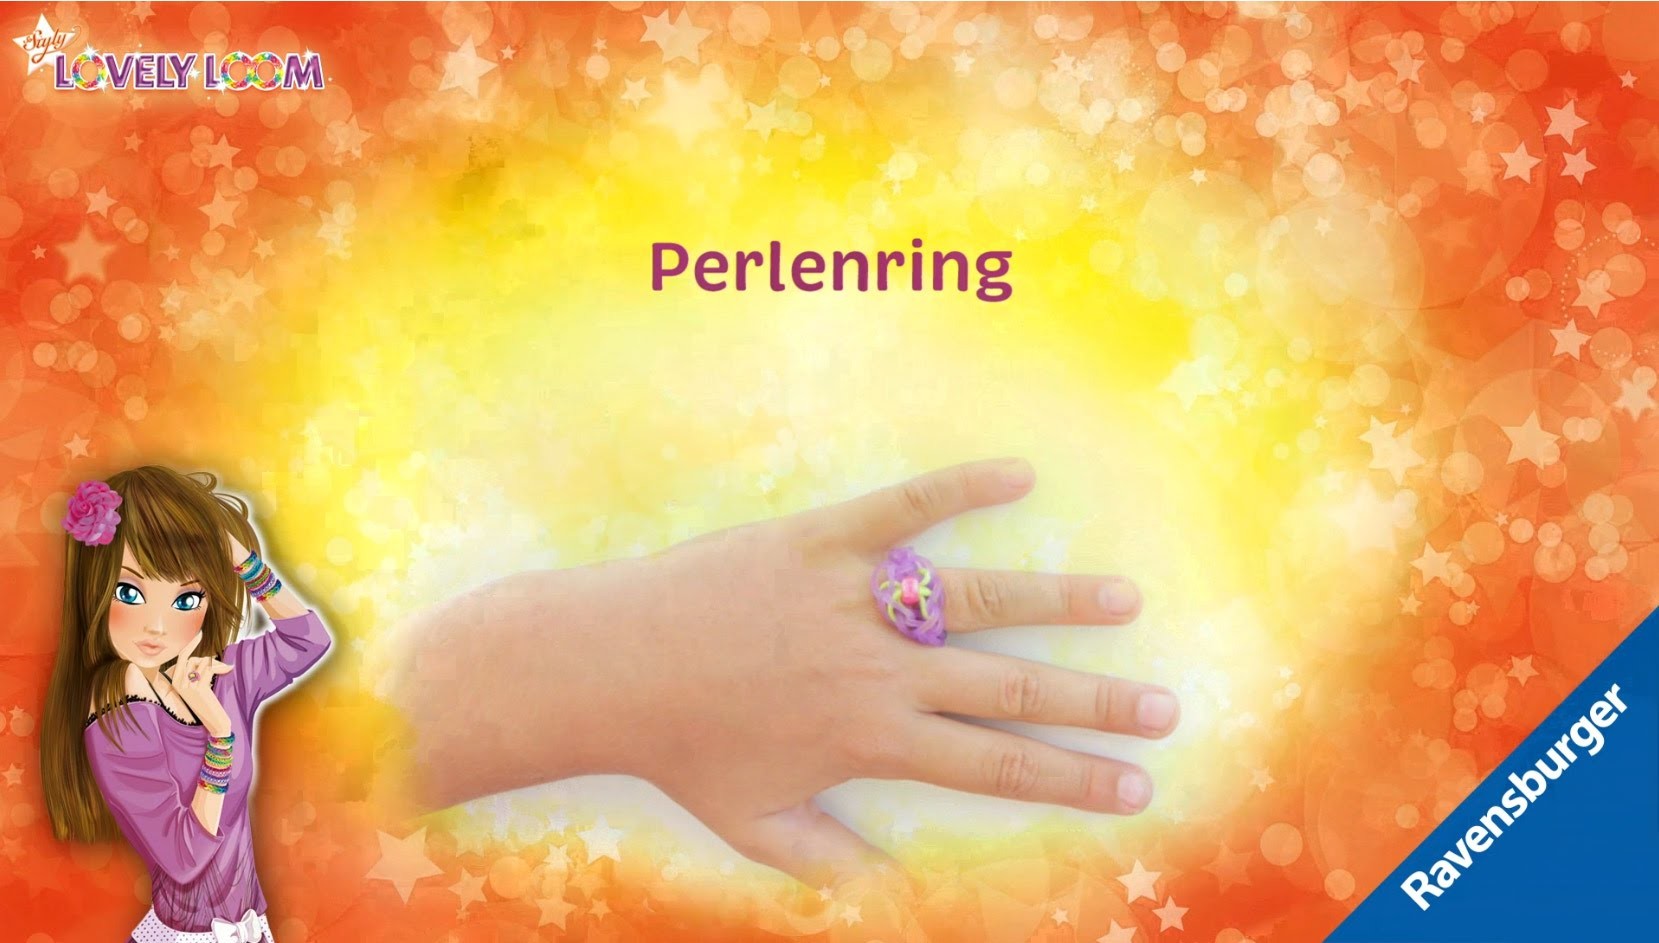 So Styly: Lovely Loom - Perlenring - Video-Anleitung